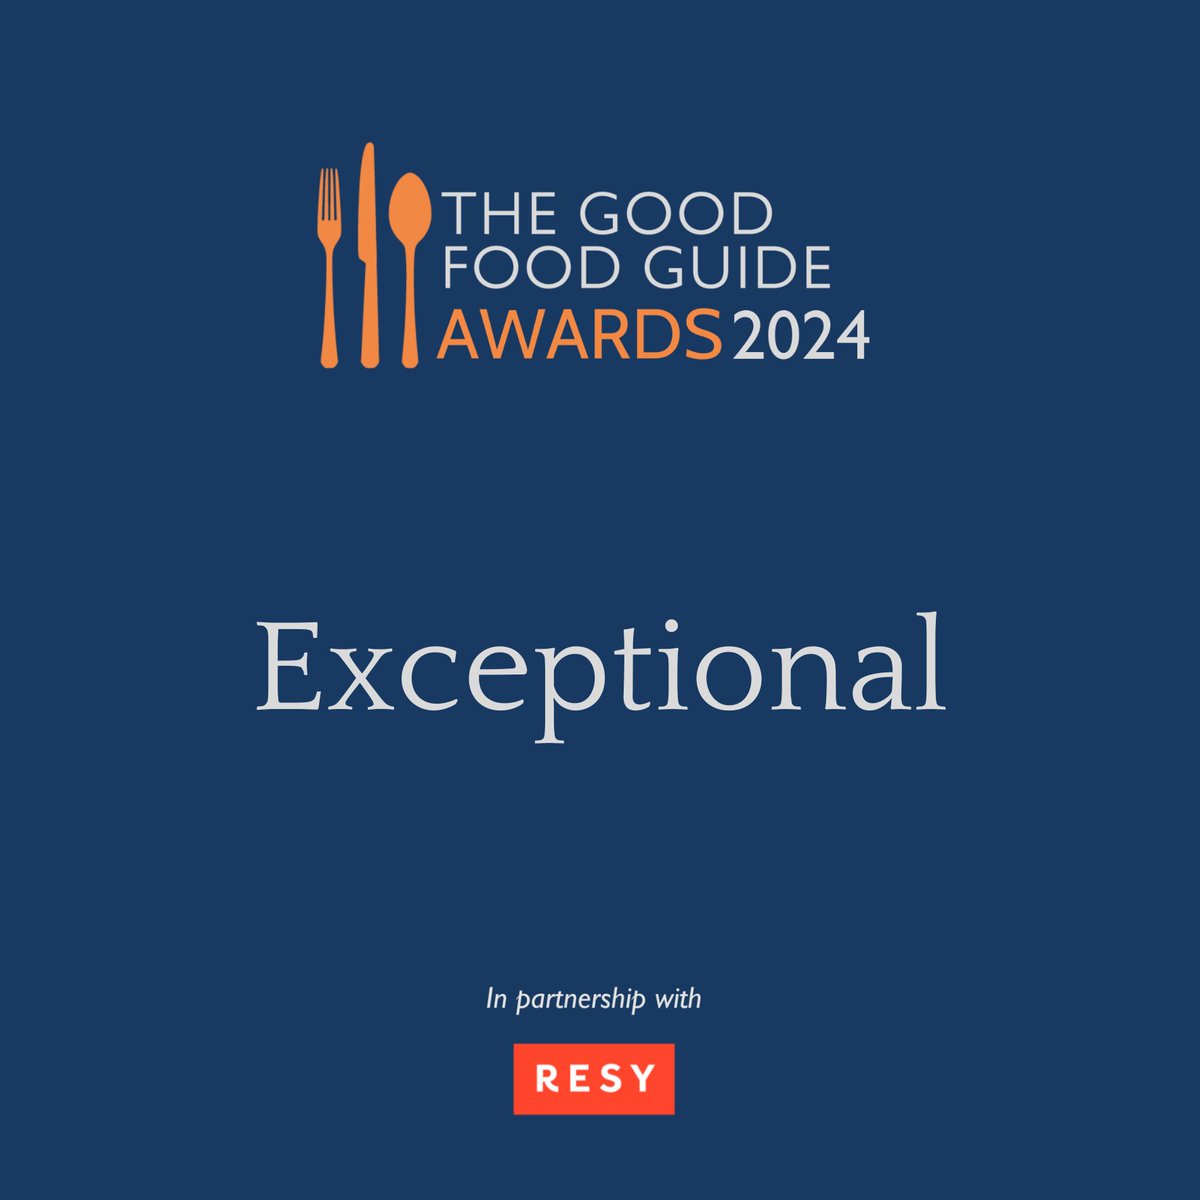 We’re very proud to have been awarded an ‘Exceptional’ rating at the @GoodFoodGuideUK Awards 2024 last night. Thank you! #exceptional #harbornekitchen #finedining